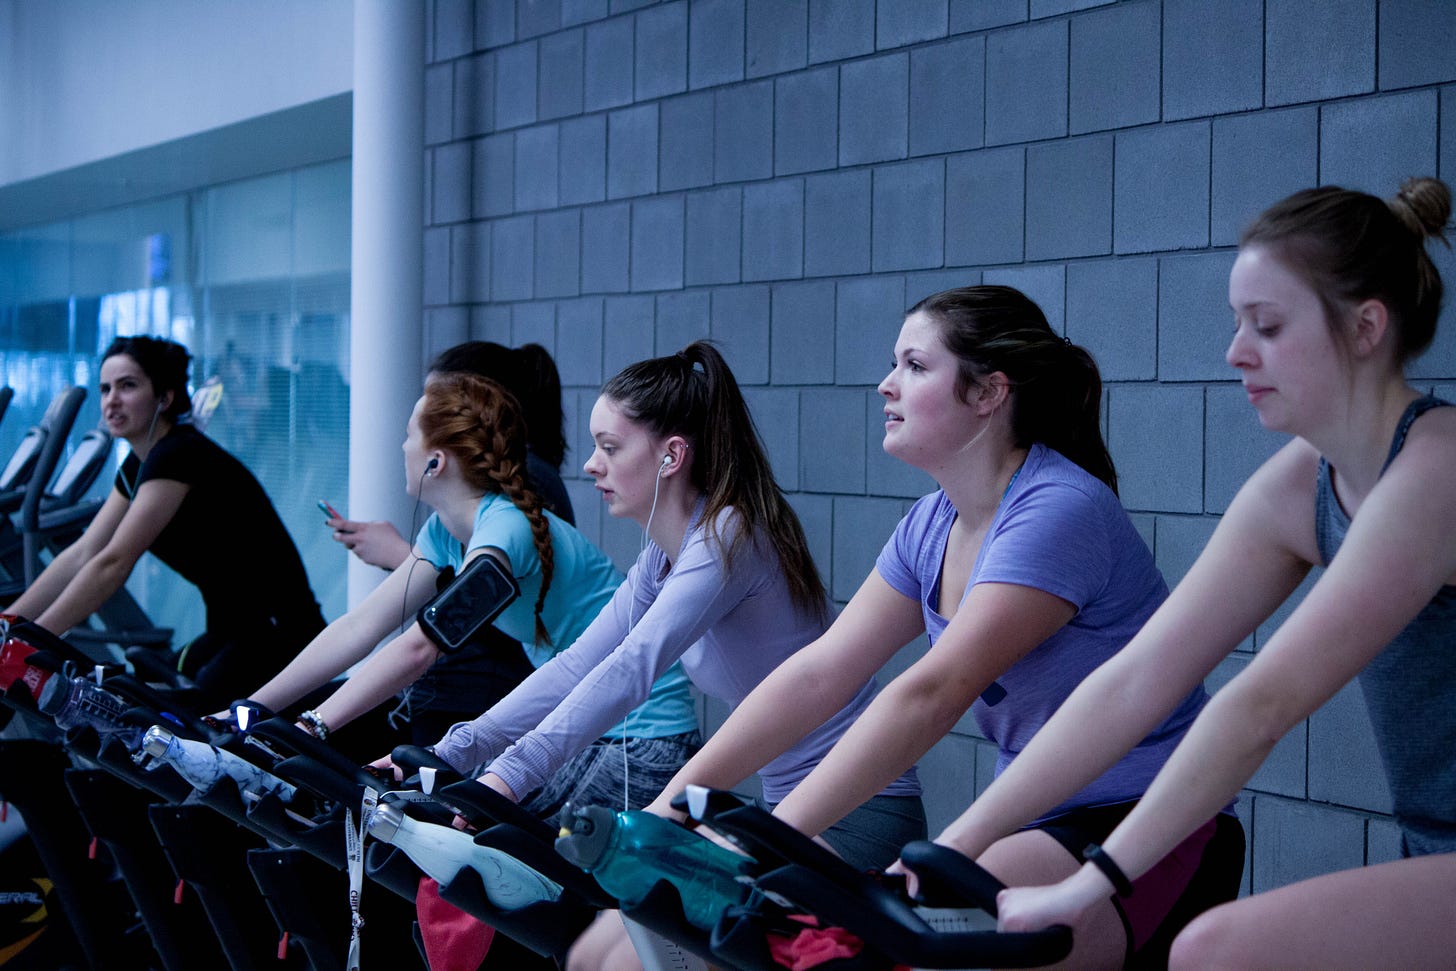 six women sit on six different spin bikes, all facing to the left. One woman has headphones in and is looking off to the side. 